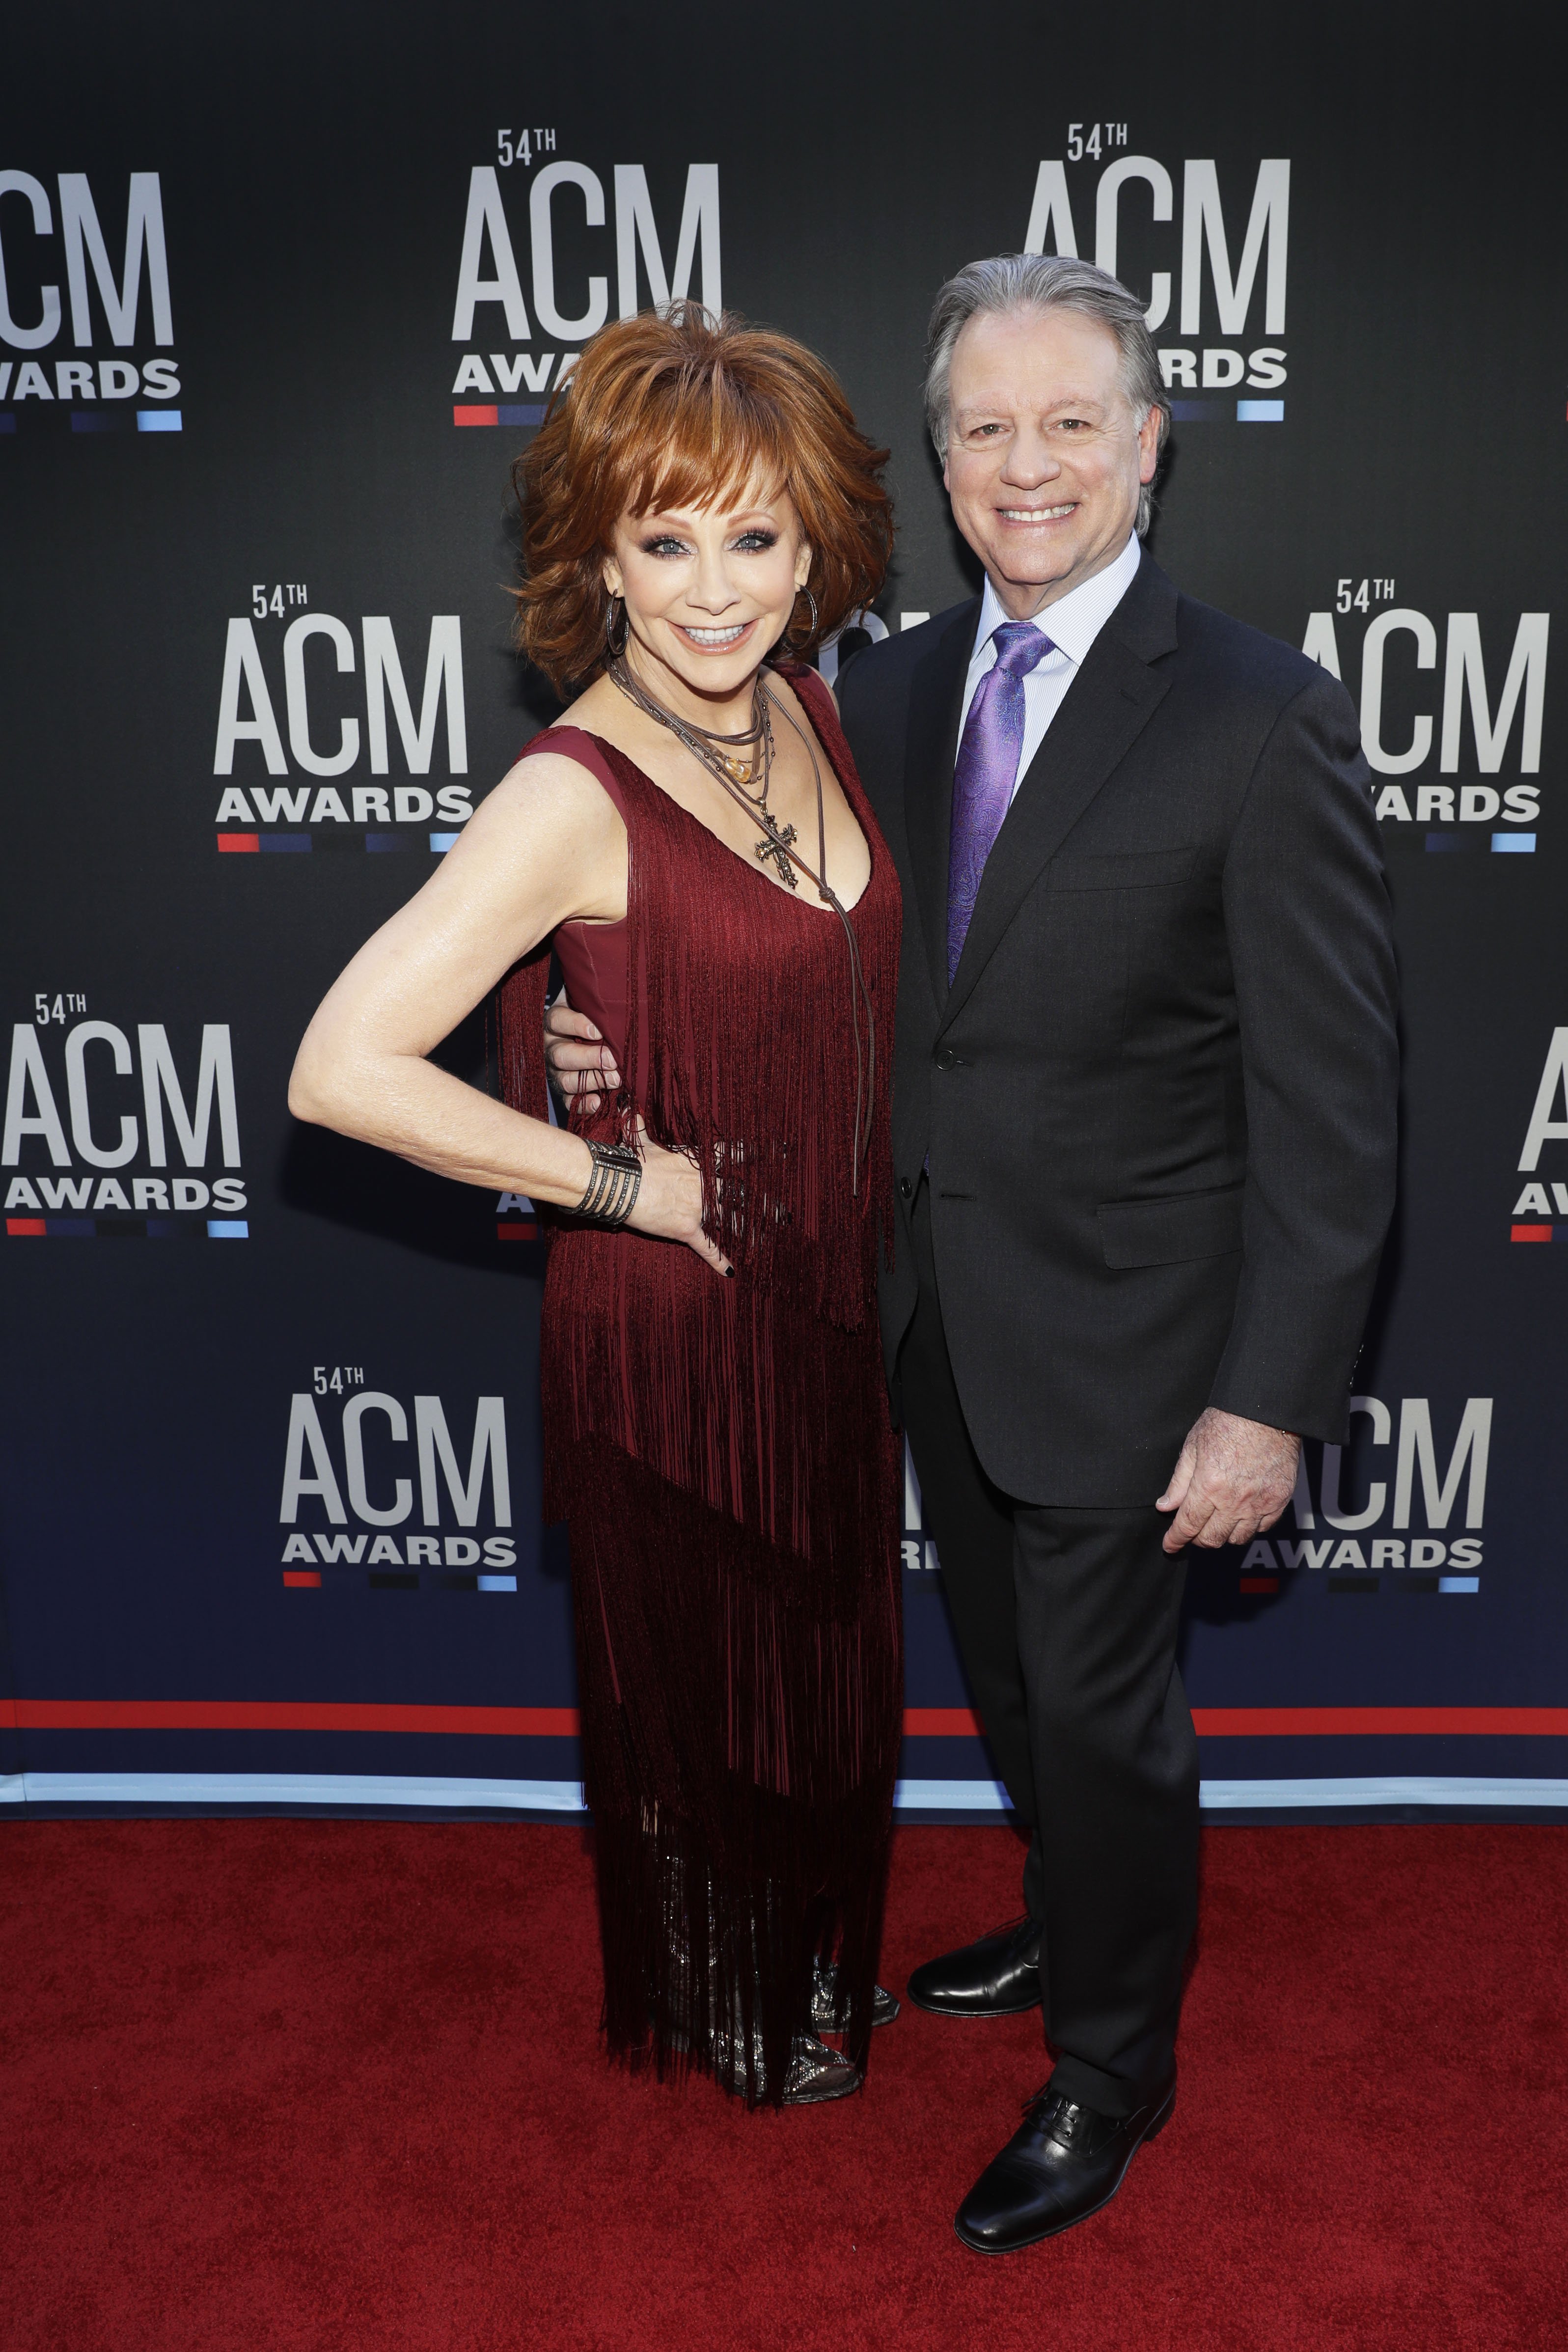  Reba McEntire and Anthony “Skeeter” Lasuzzo attend the Academy Of Country Music Awards in Las Vegas on April 7, 2019 | Photo: Getty Images